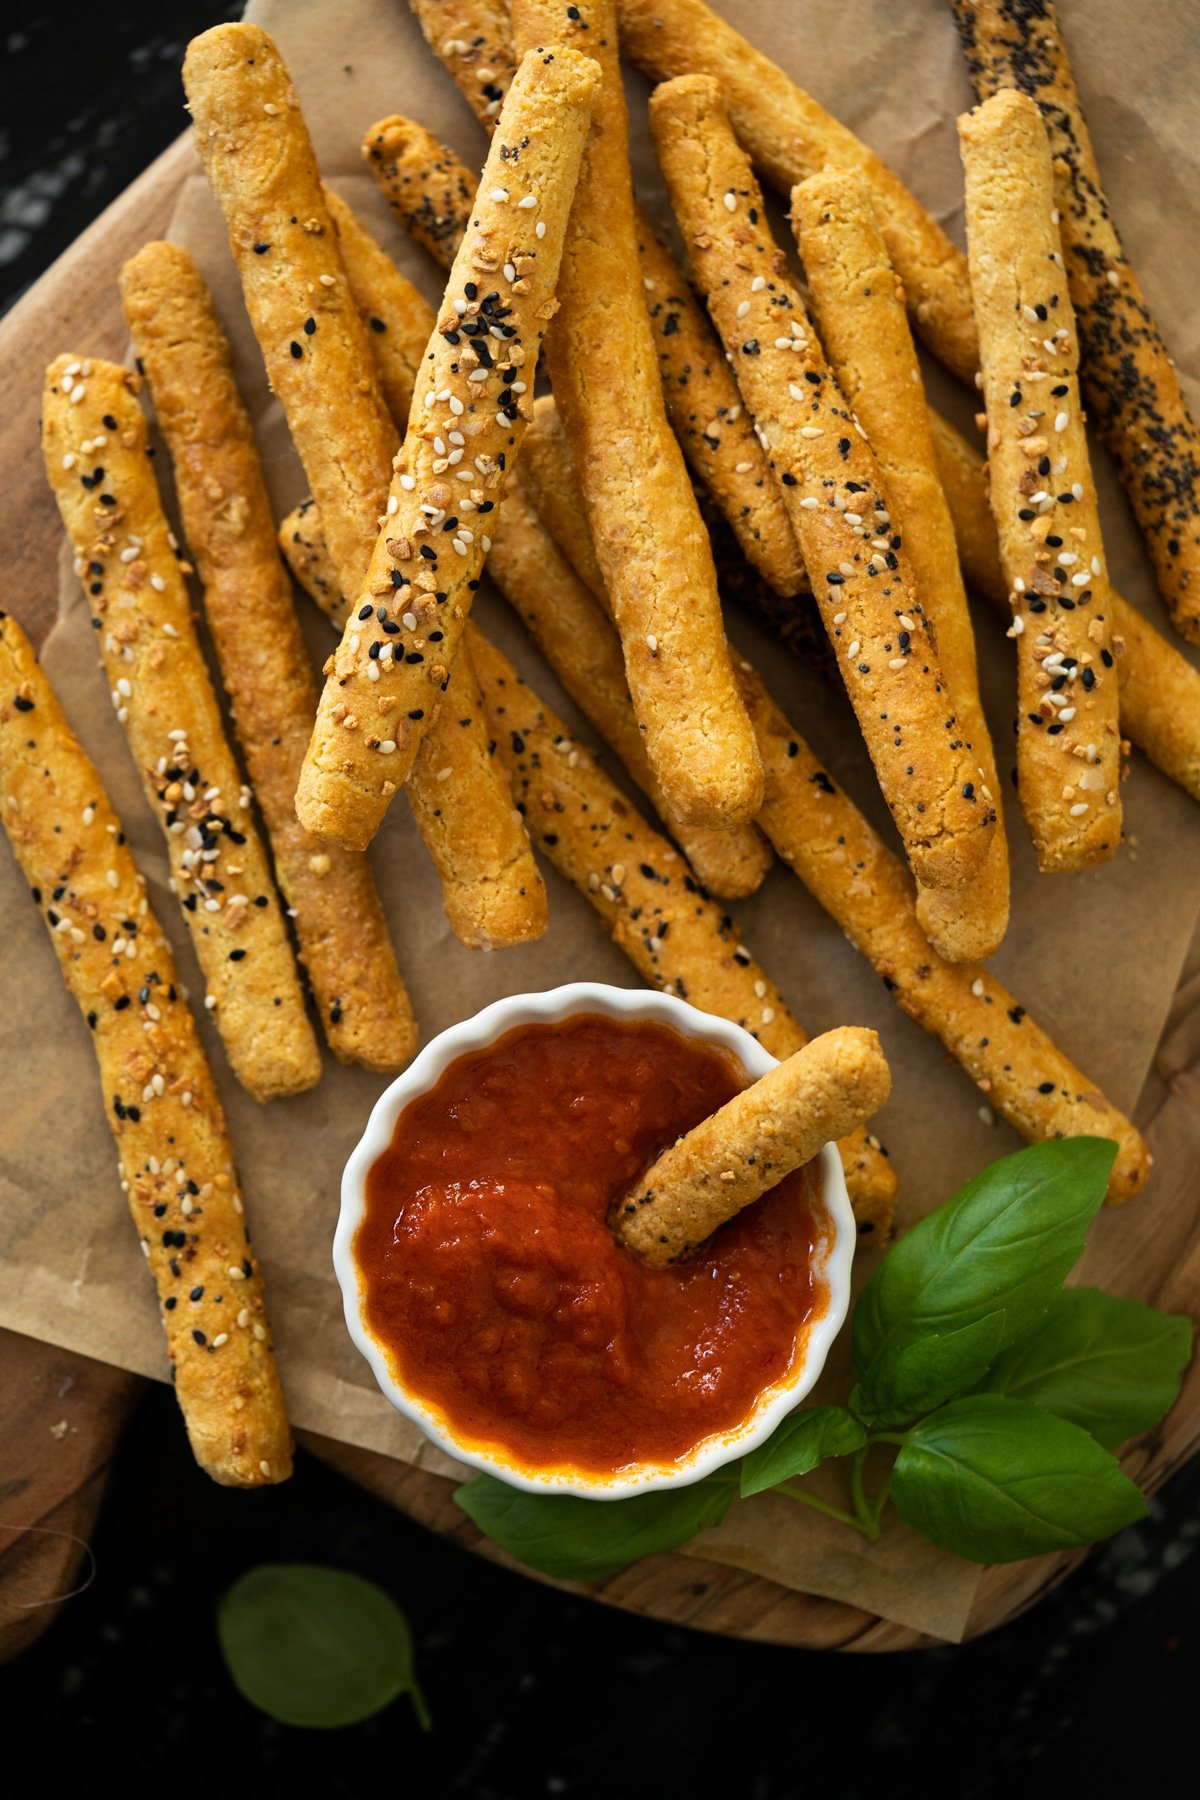 Keto breadsticks on a wooden board served with marinara sauce